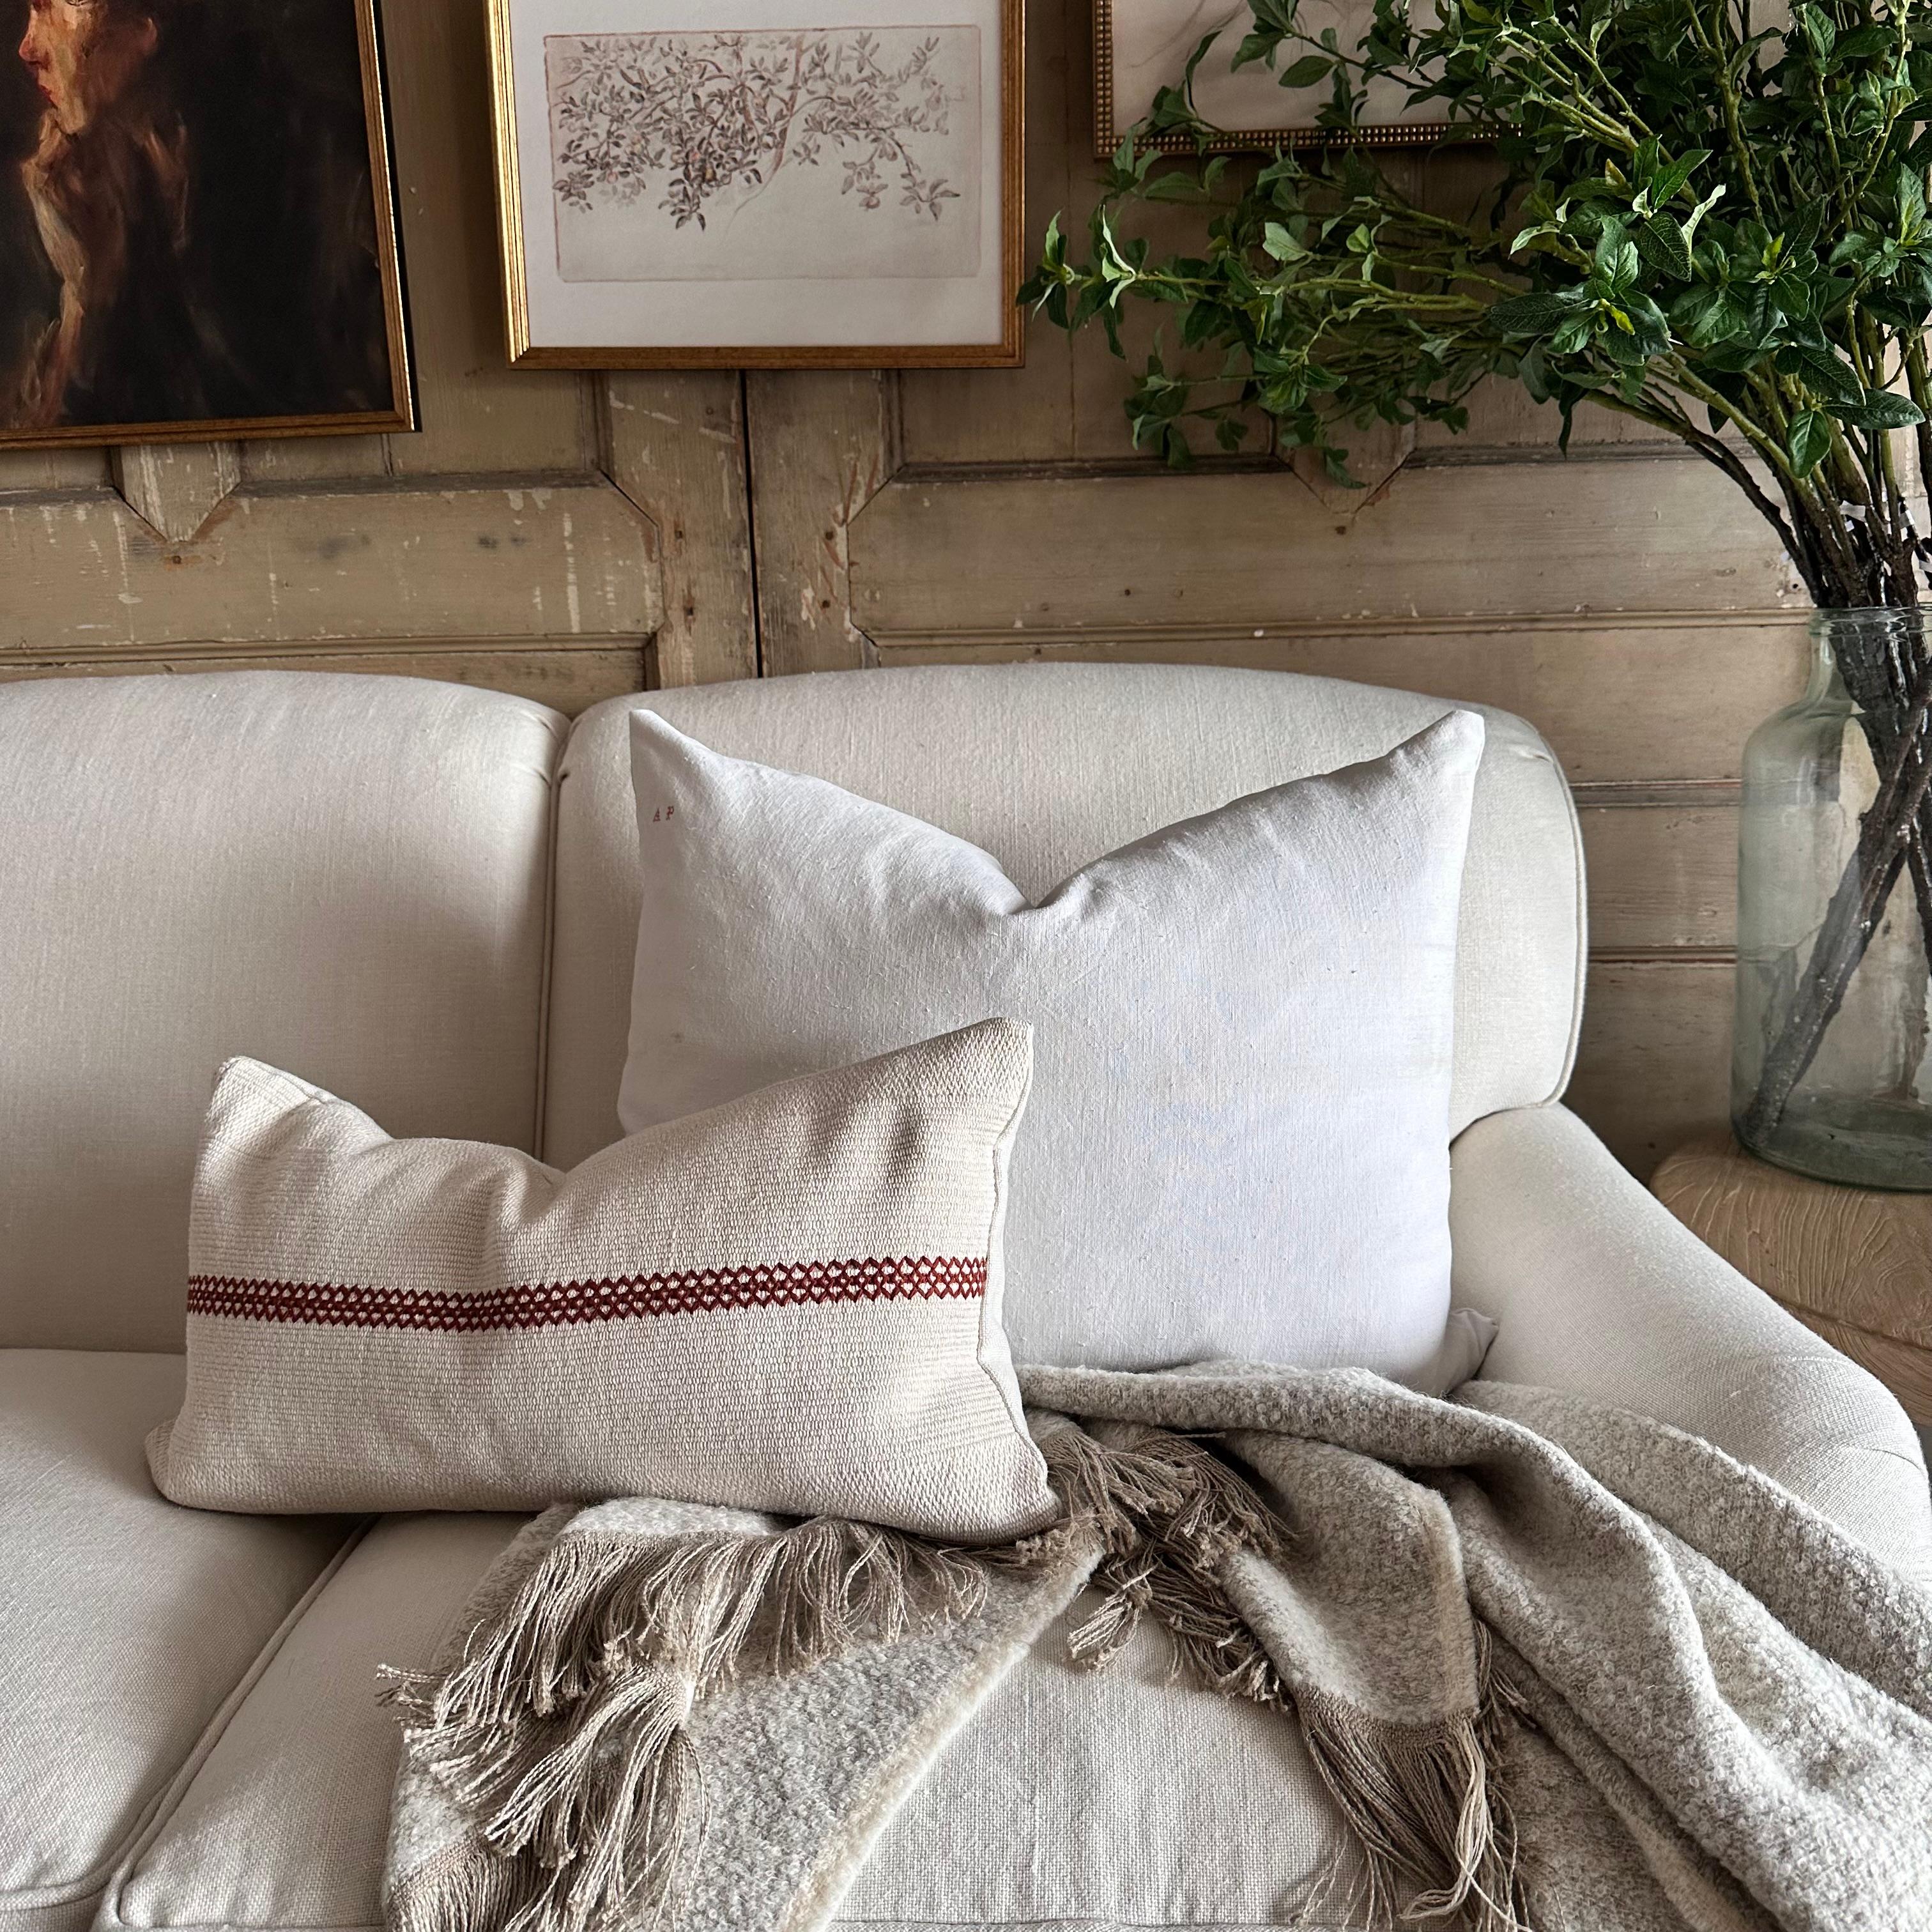 Antique French linen textile pillow with seam 0ff- white antique French linen textured grain sack pillow with original seam, backside is in a similar or same antique material.

Our linens are pre-washed ready for use. Please note that these fabrics